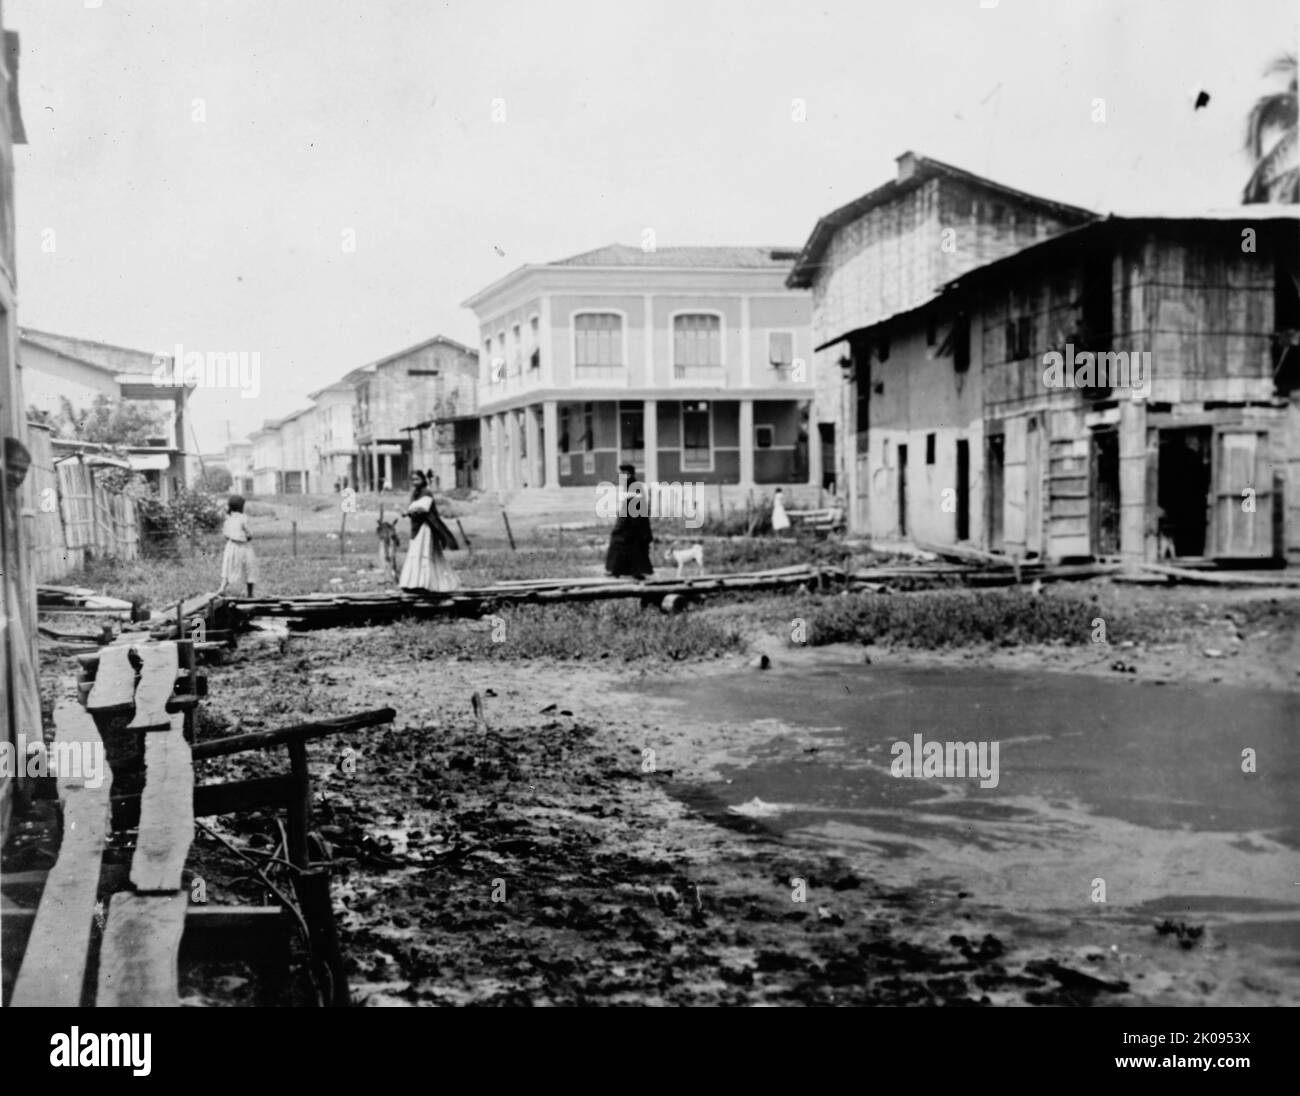 Ecuador - Scenes In Quayaquil [sic], Ecuador, 1912. 'Street scene along the edge of the better part of the city'. Women walking on raised wooden walkway over mud. Stock Photo